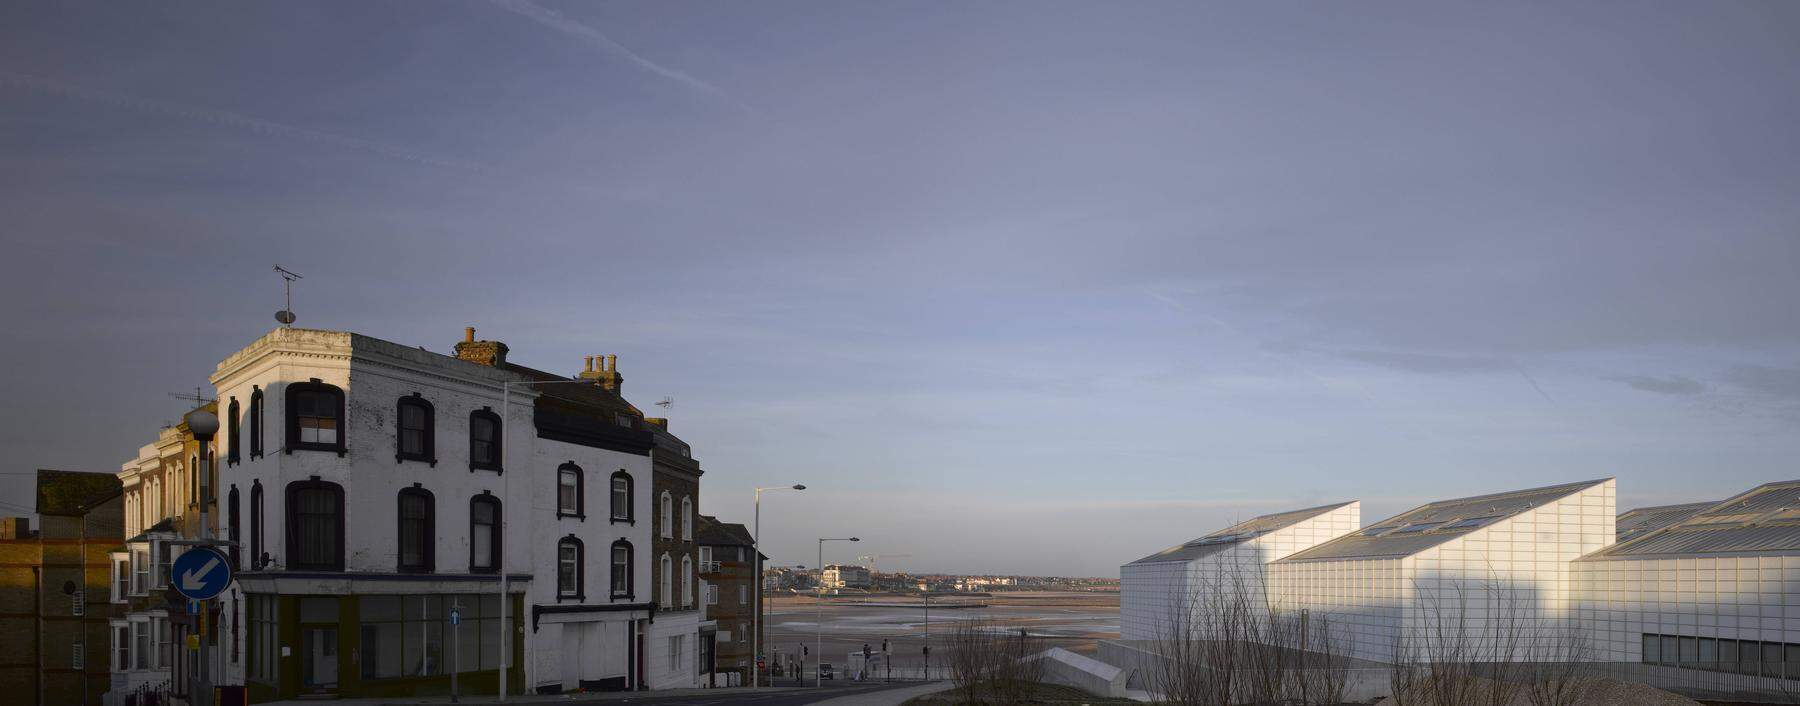 Turner Contemporary and old buildings on the coast Margate Kent United Kingdom PUBLICATIONxINxGER